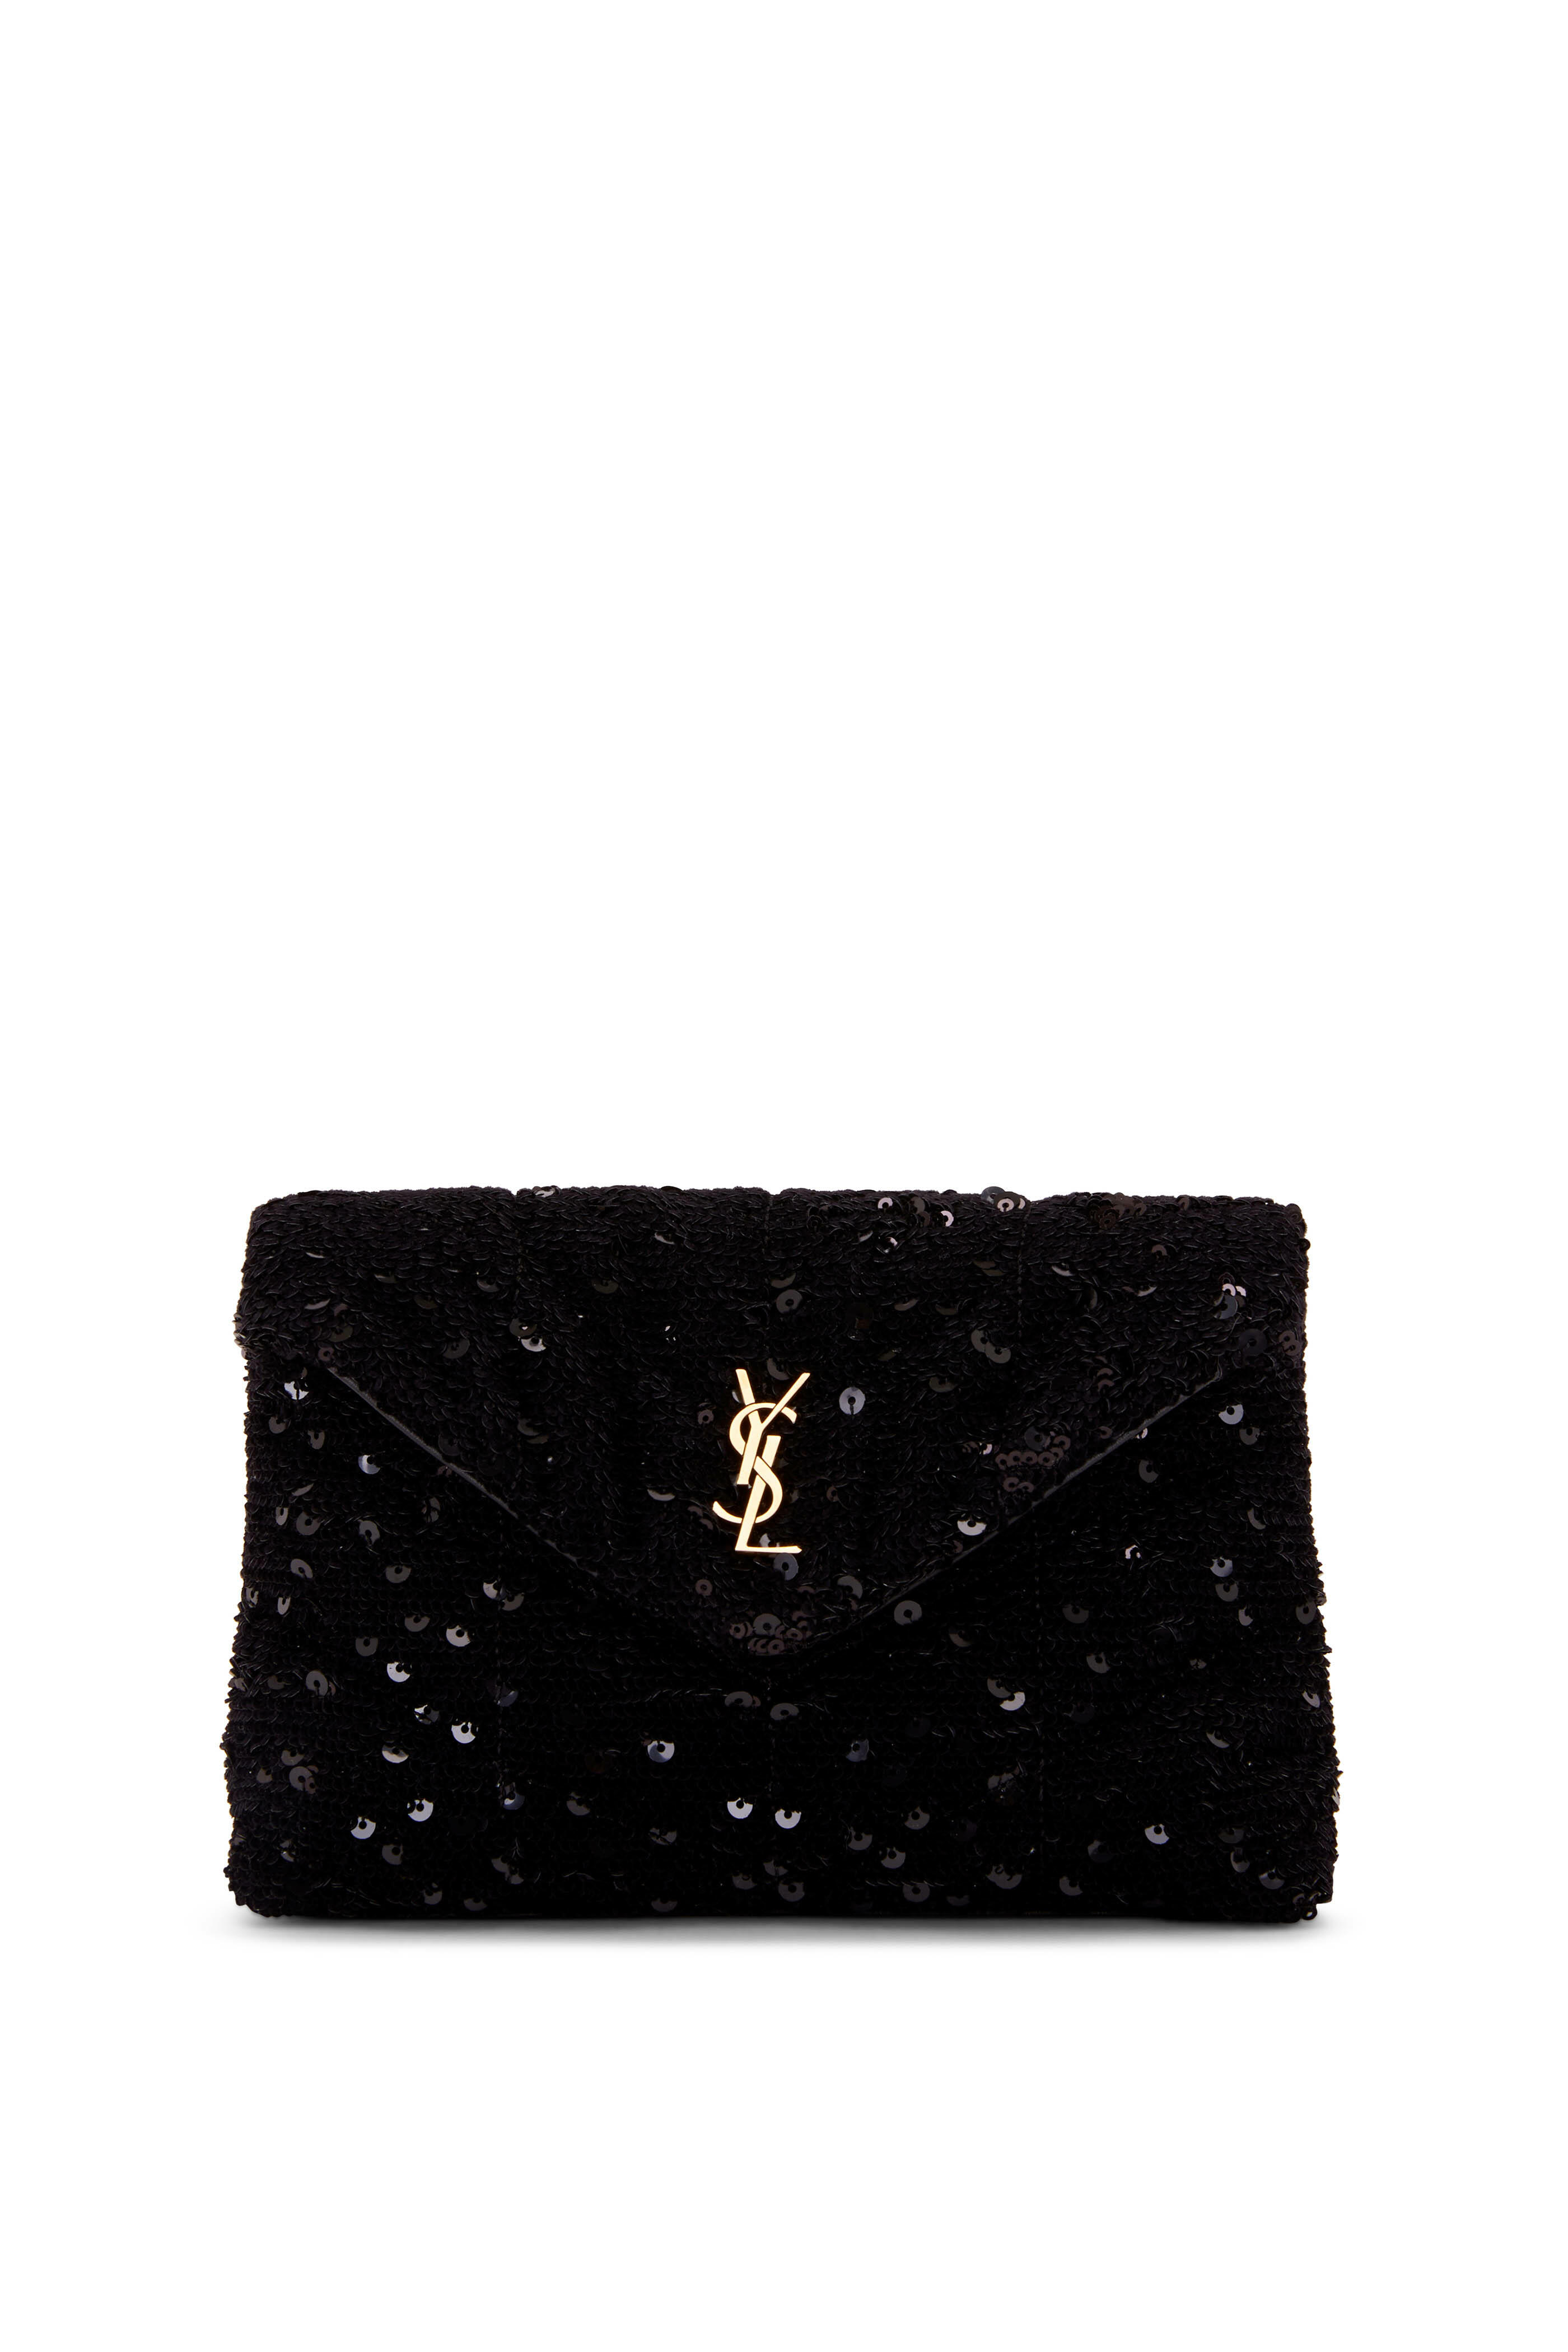 YVES SAINT LAURENT Small Puffer Sequin Clutch Wallet Black - sold